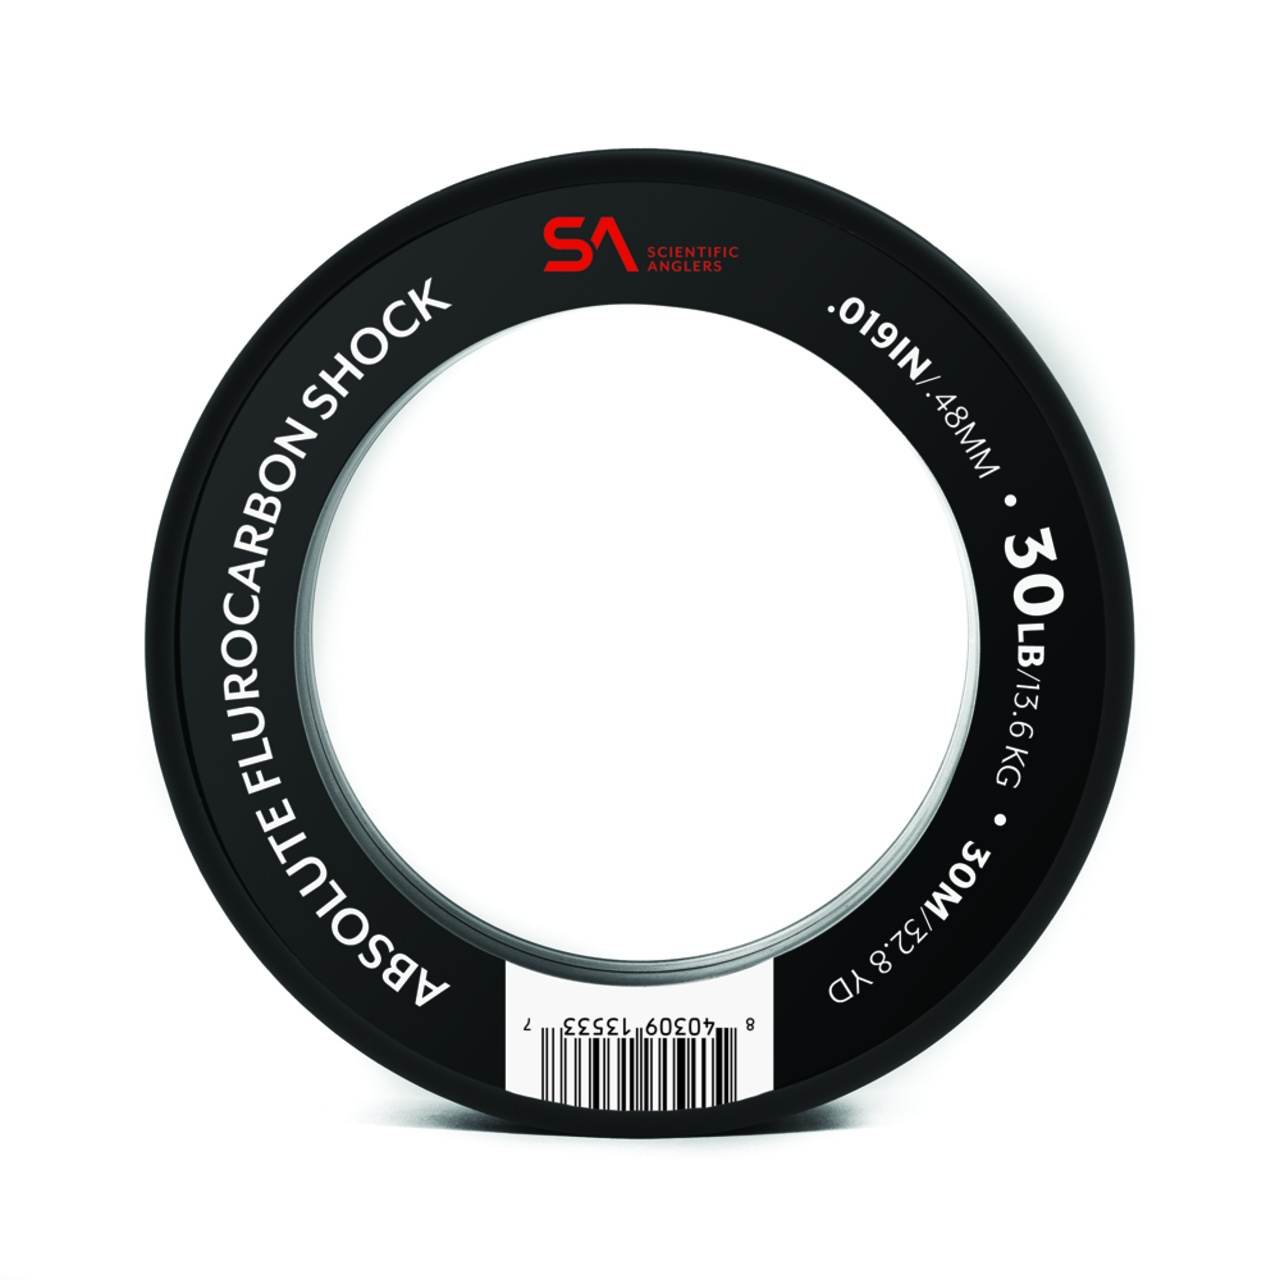 SA Absolute Fluorocarbon Shock Tippet Material 0,45mm